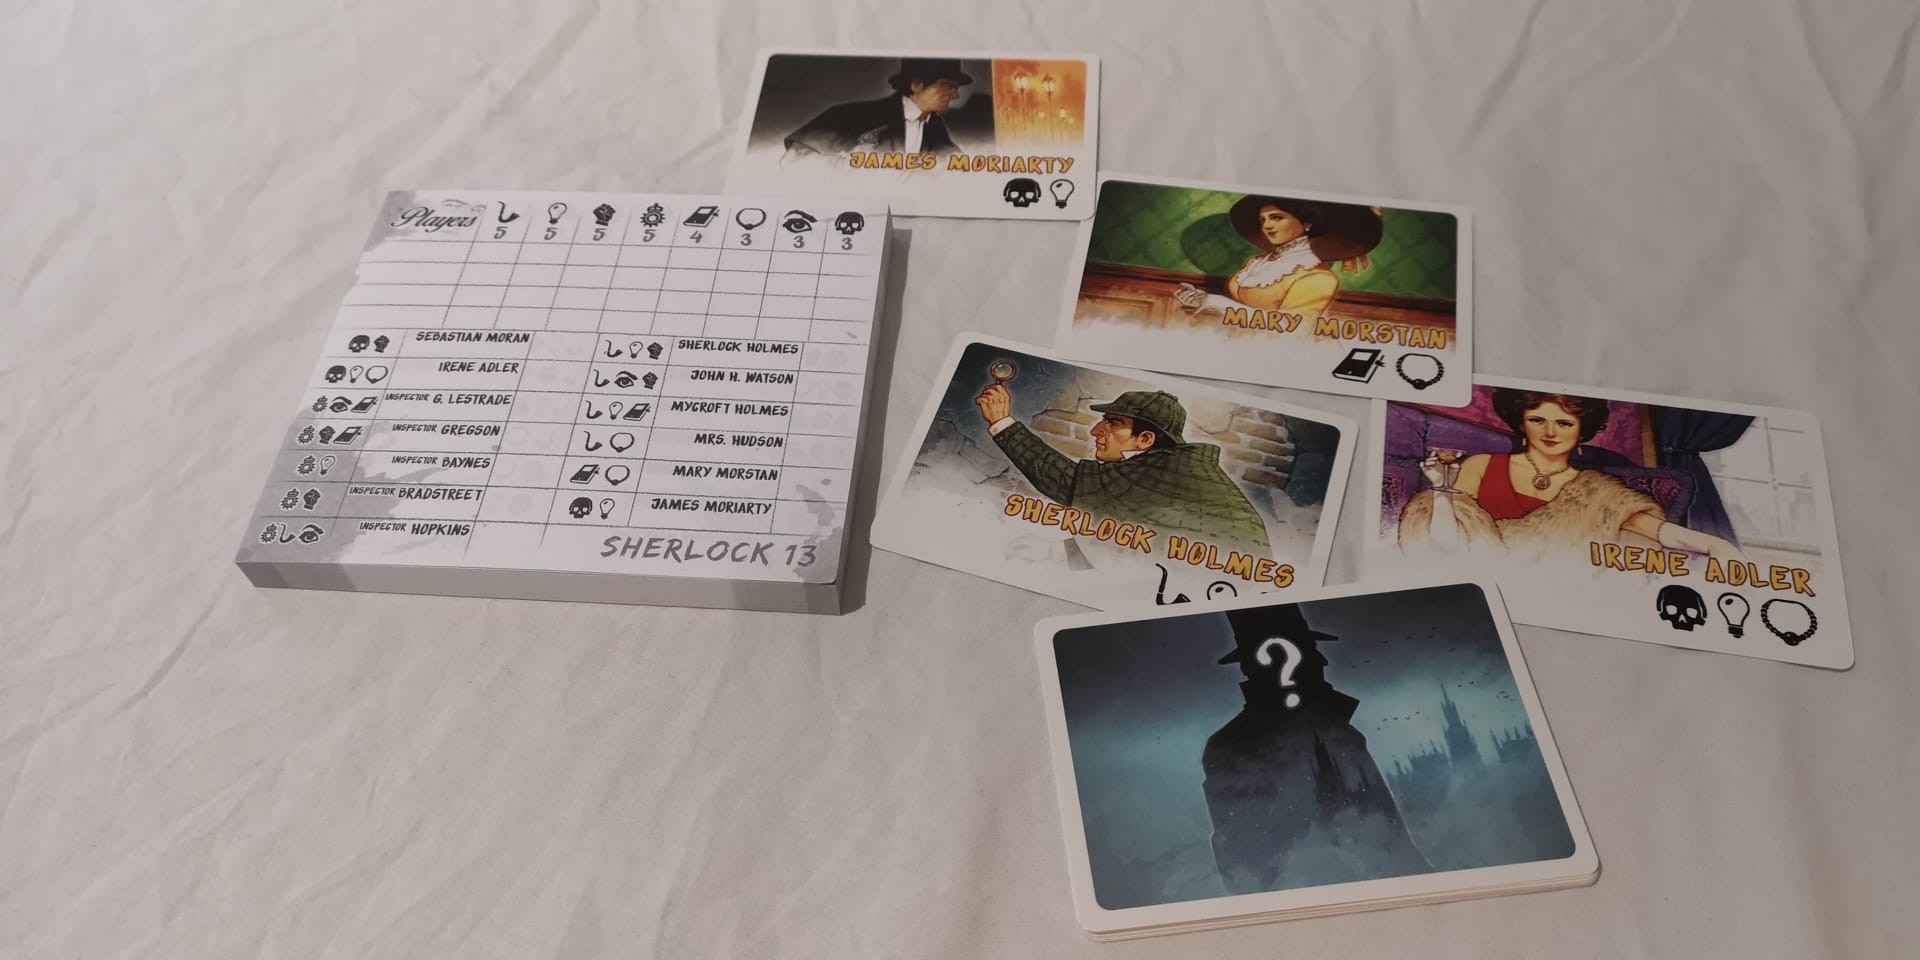 Sherlock 13 Clue Sheets and Suspect Cards.